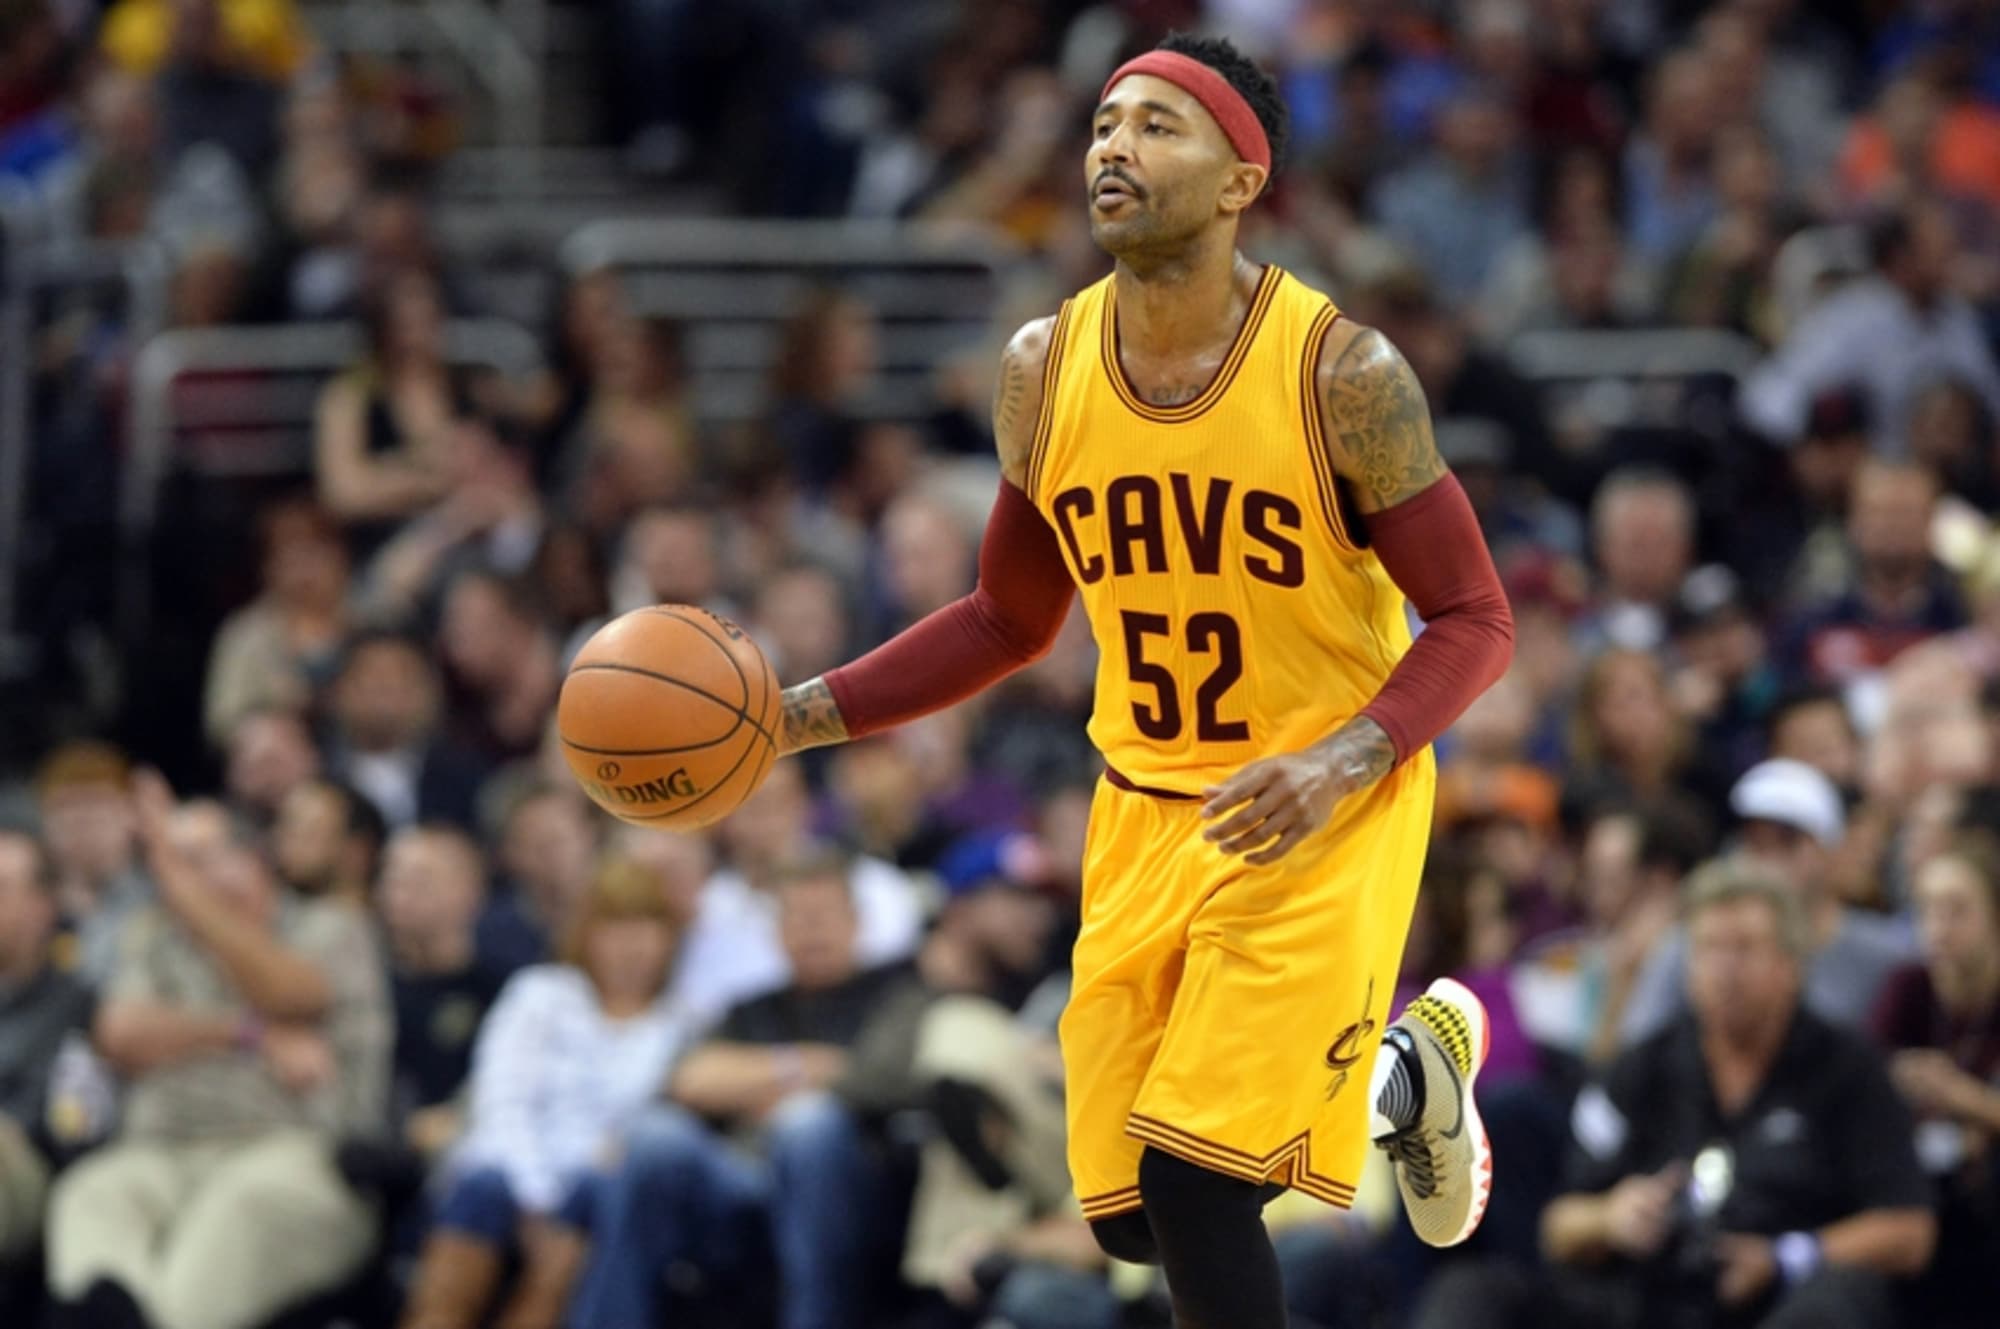 Cavaliers Trade Mo Williams to the Clippers for Baron Davis